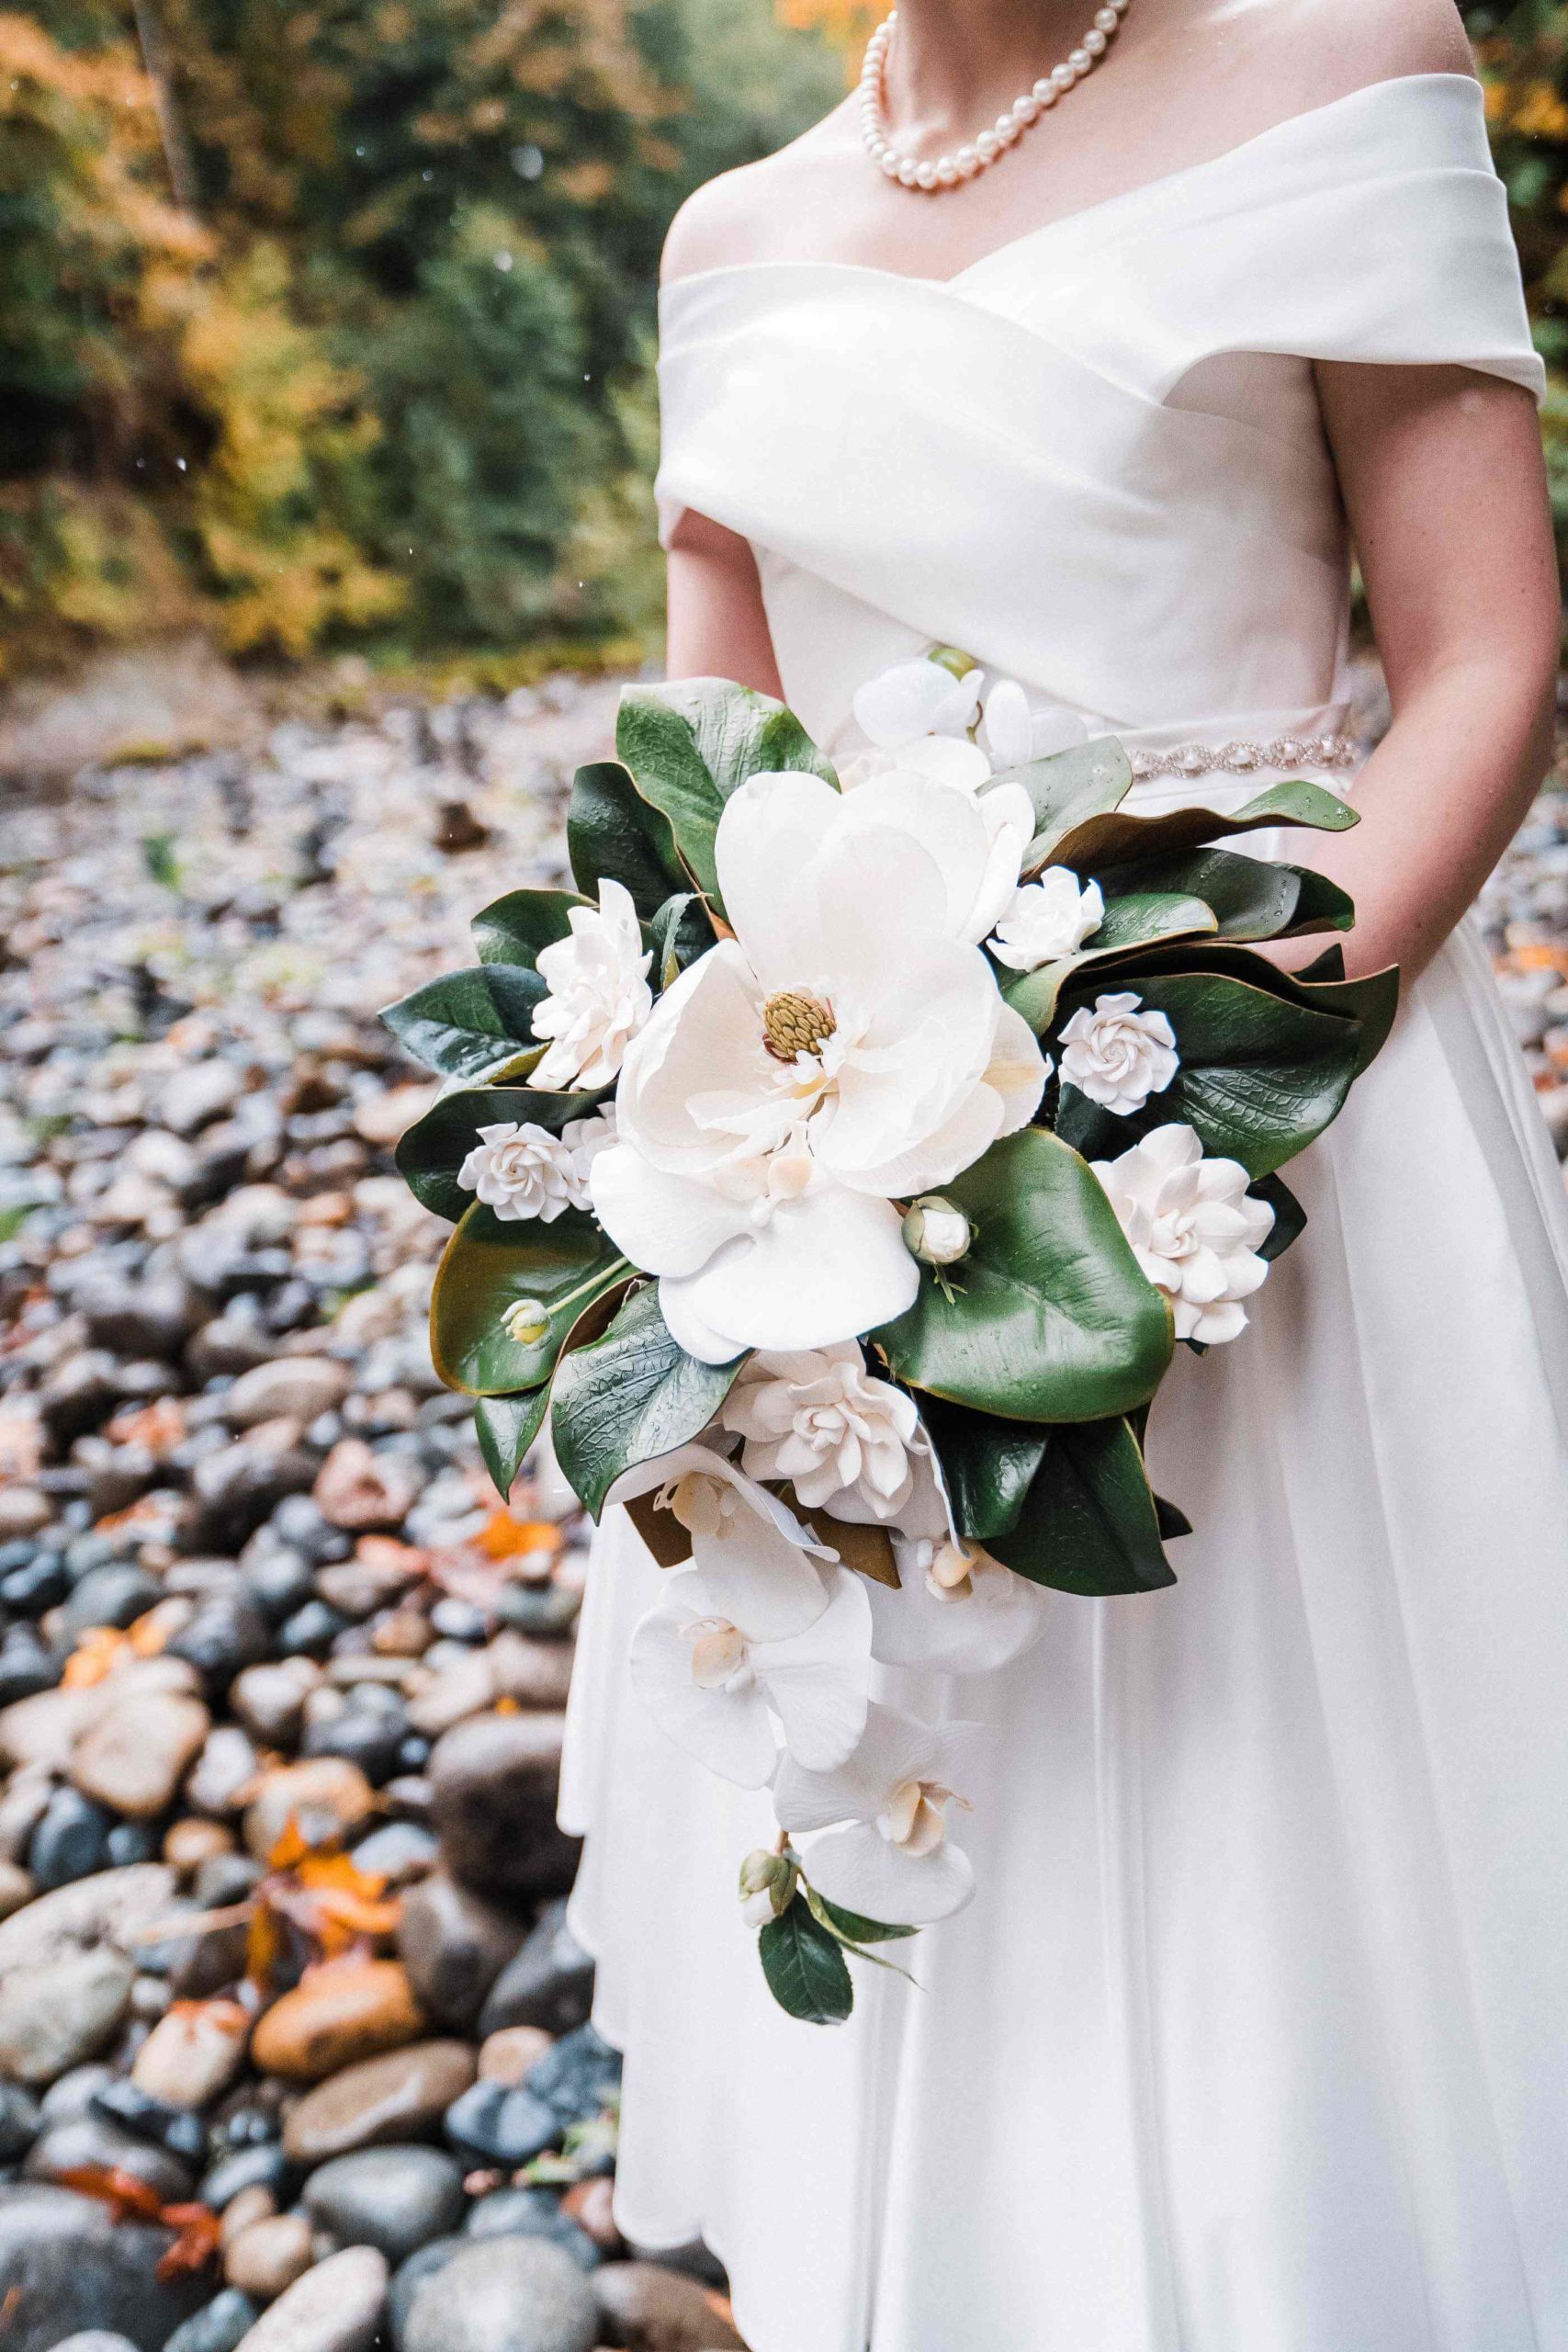 Large white florals with green leaves wedding bouquet